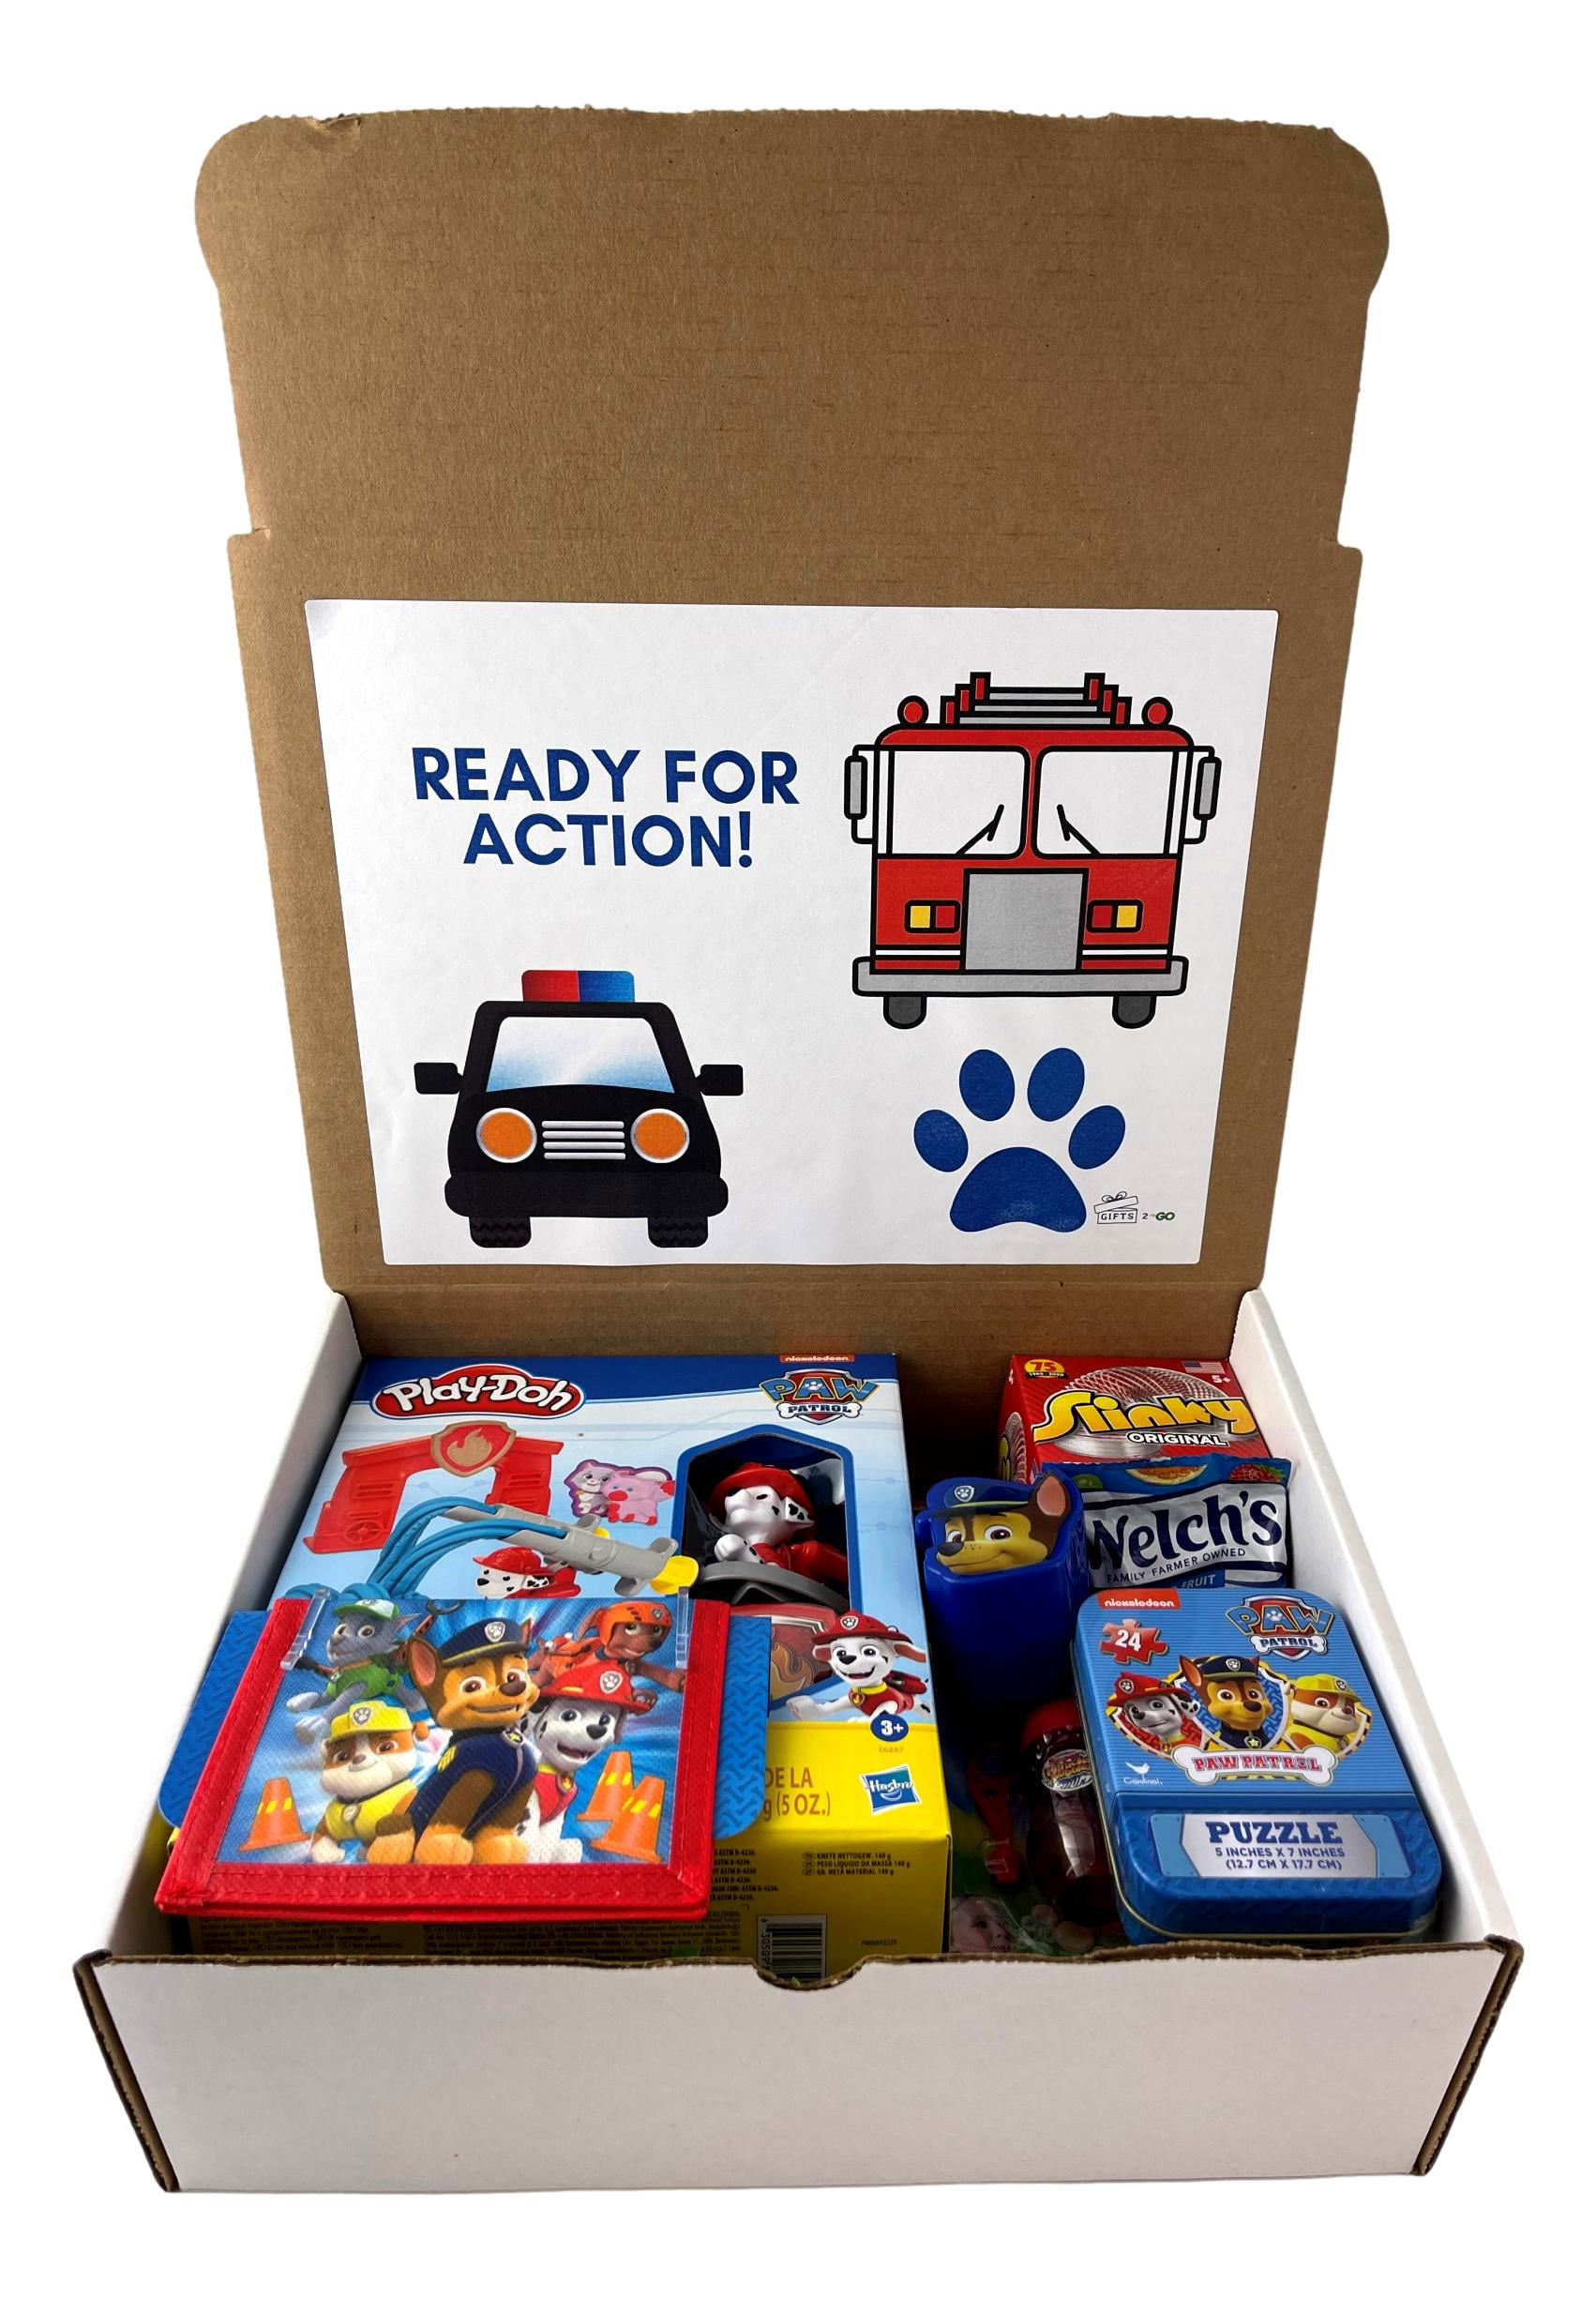 Patrol Play Box Gift Basket for Kids and Children ages 4-8 Filled with Toys and Fun! Walmart.com